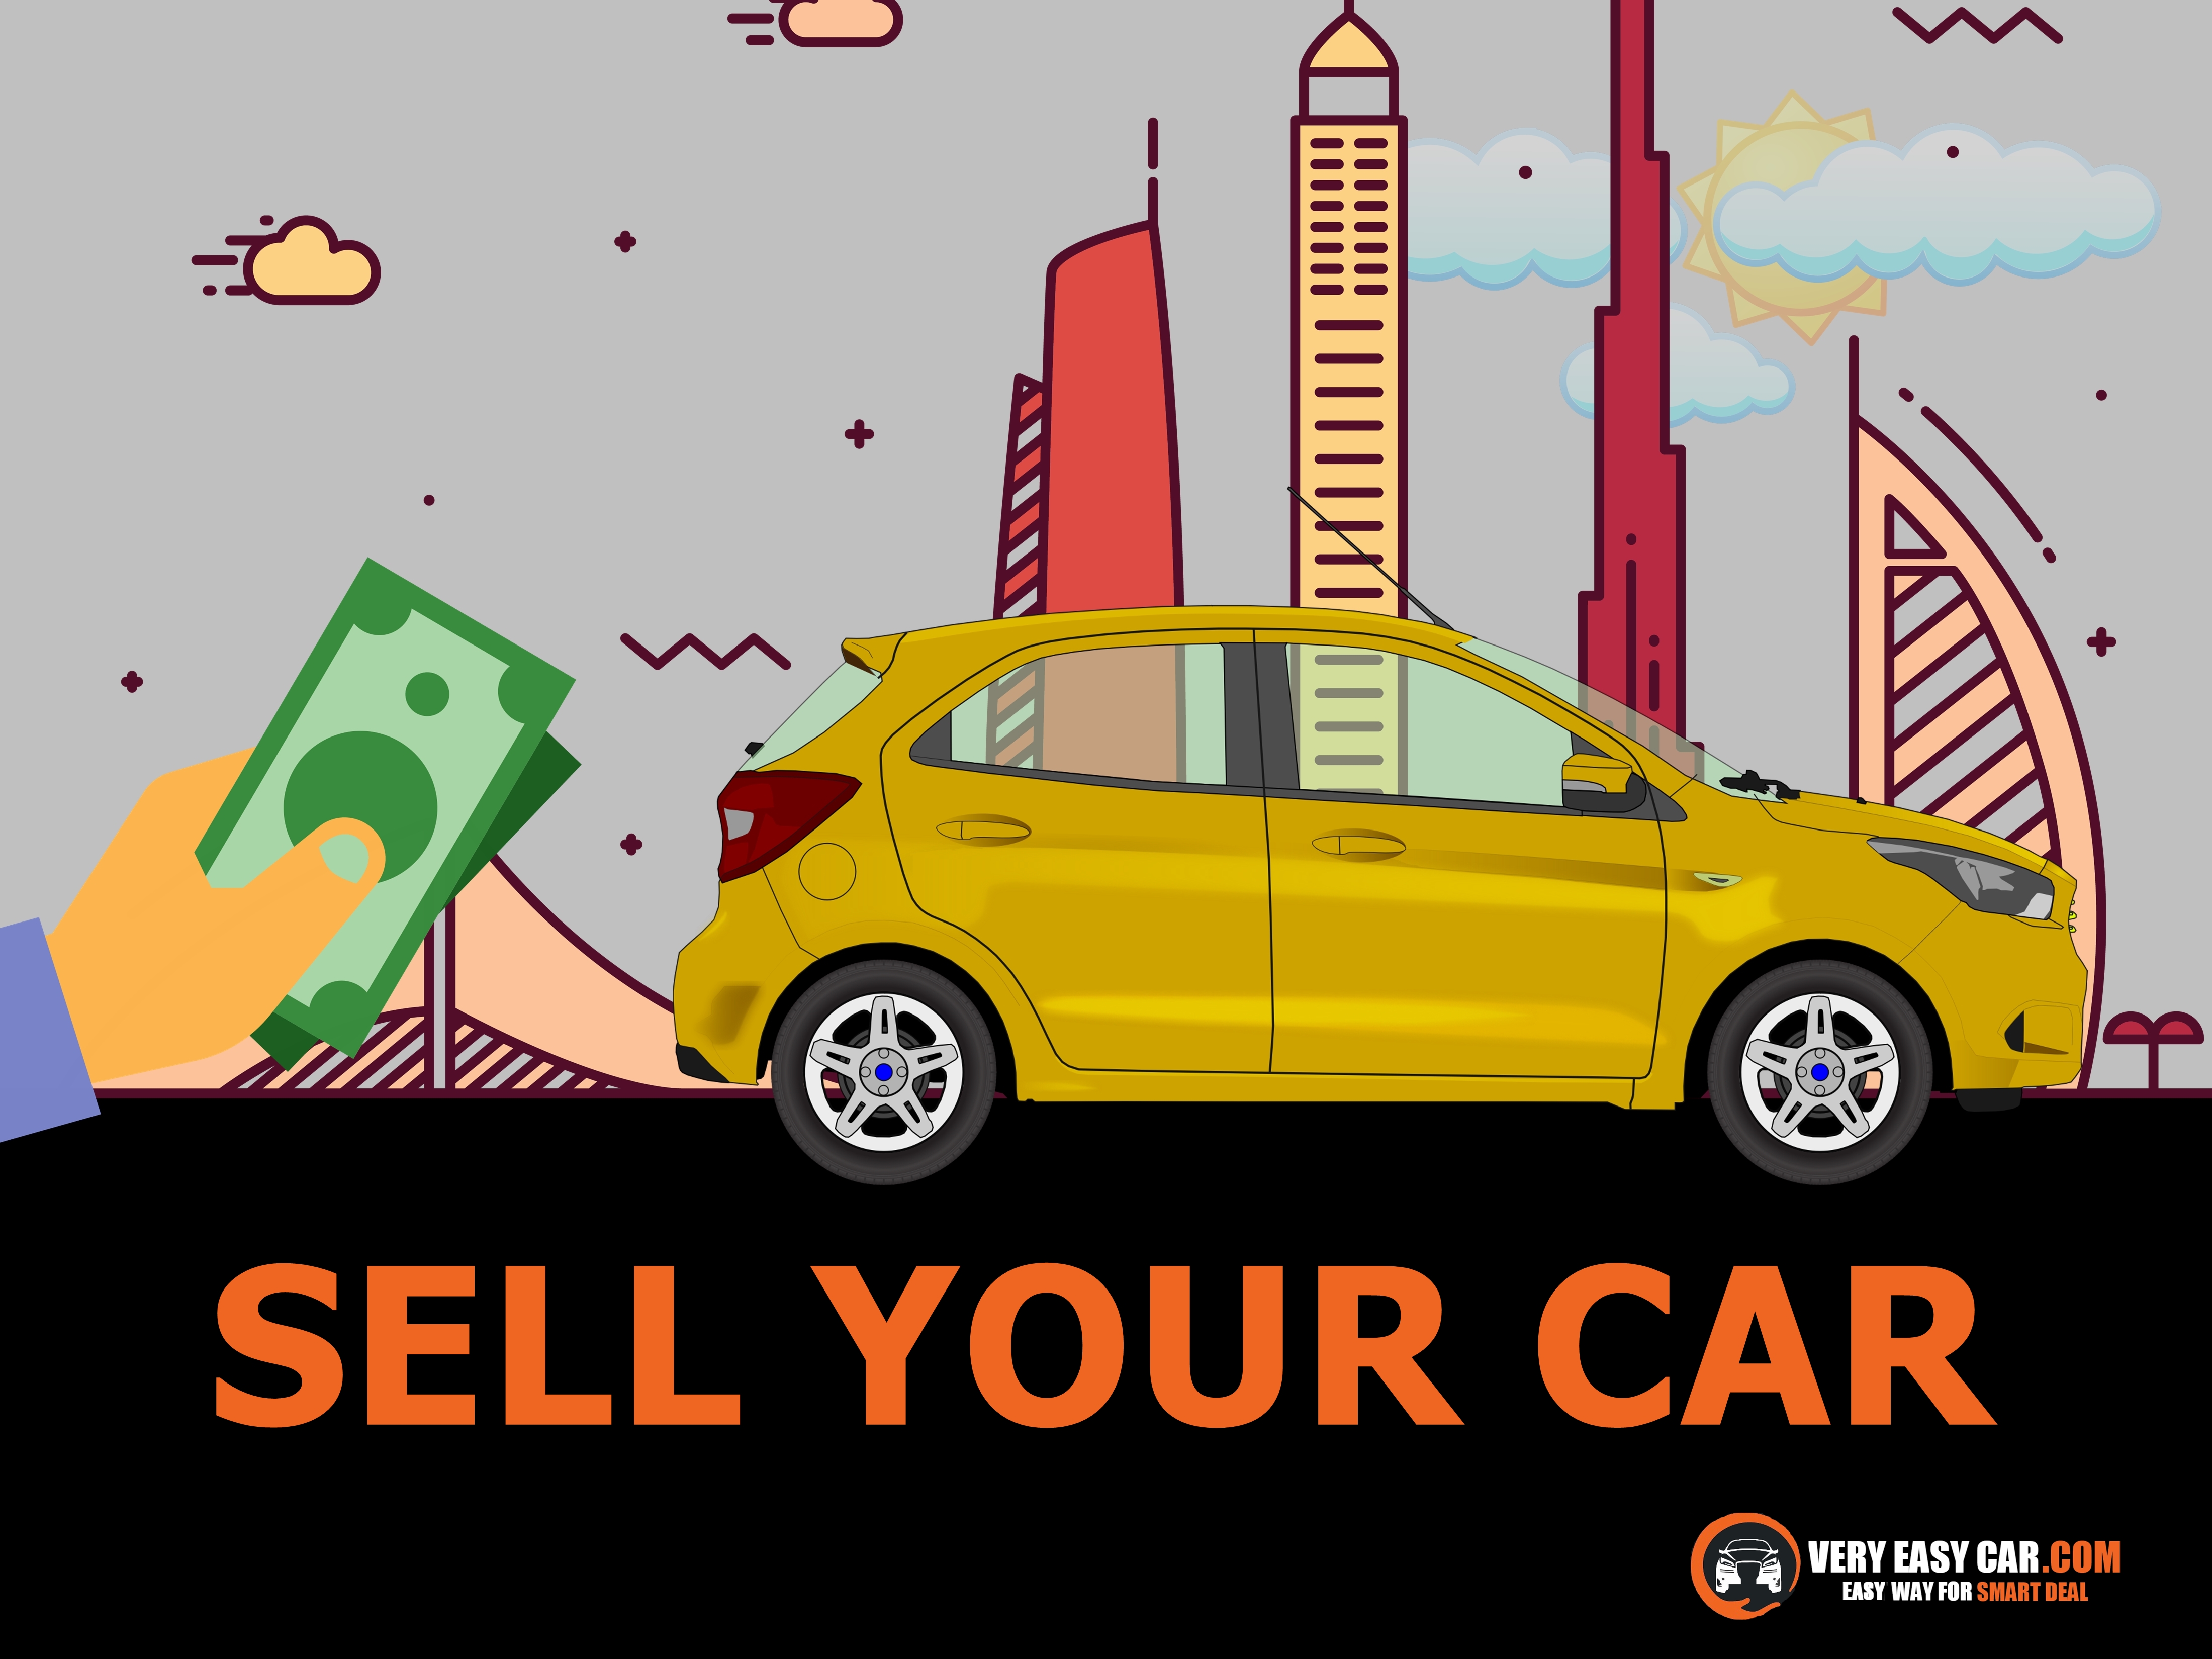 sell car - Sell used car in UAED, Dubai. Very Easy Car